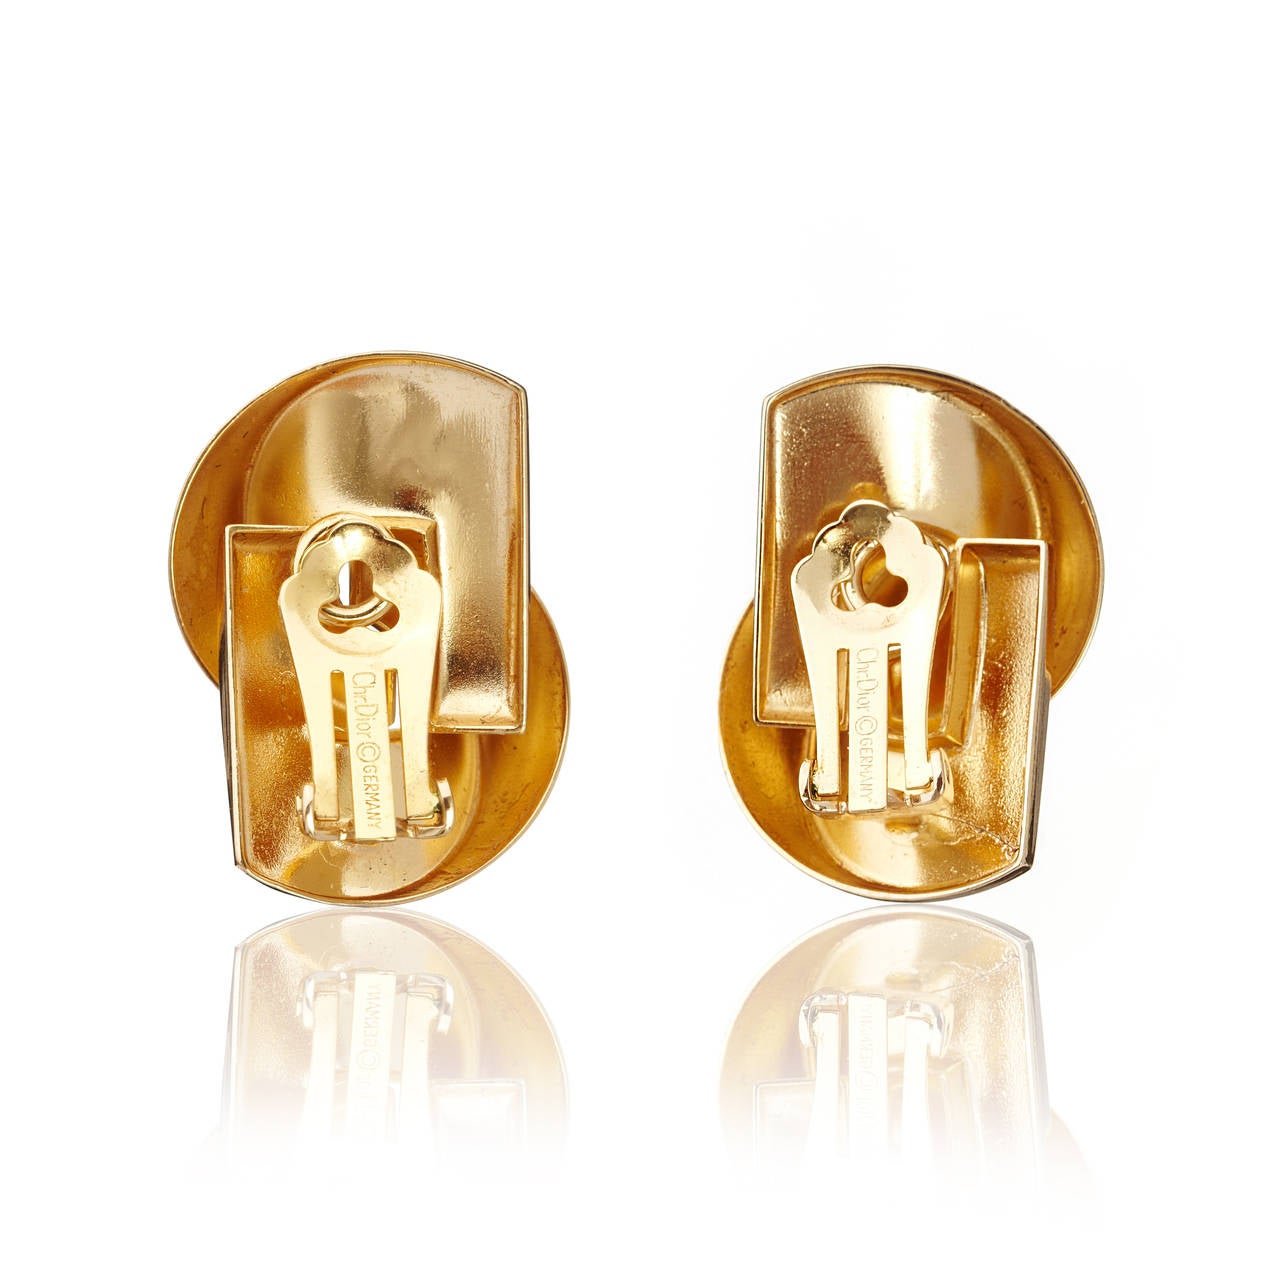 A striking pair of very sculptural 1980′s Dior clip on earrings, in their popular love knot design.
The earrings are gold tone and measure 3.5 x 2cm.
Marked: Chr.Dior (C) Germany

About the Designer:
Christian Dior 1905-1957
French fashion